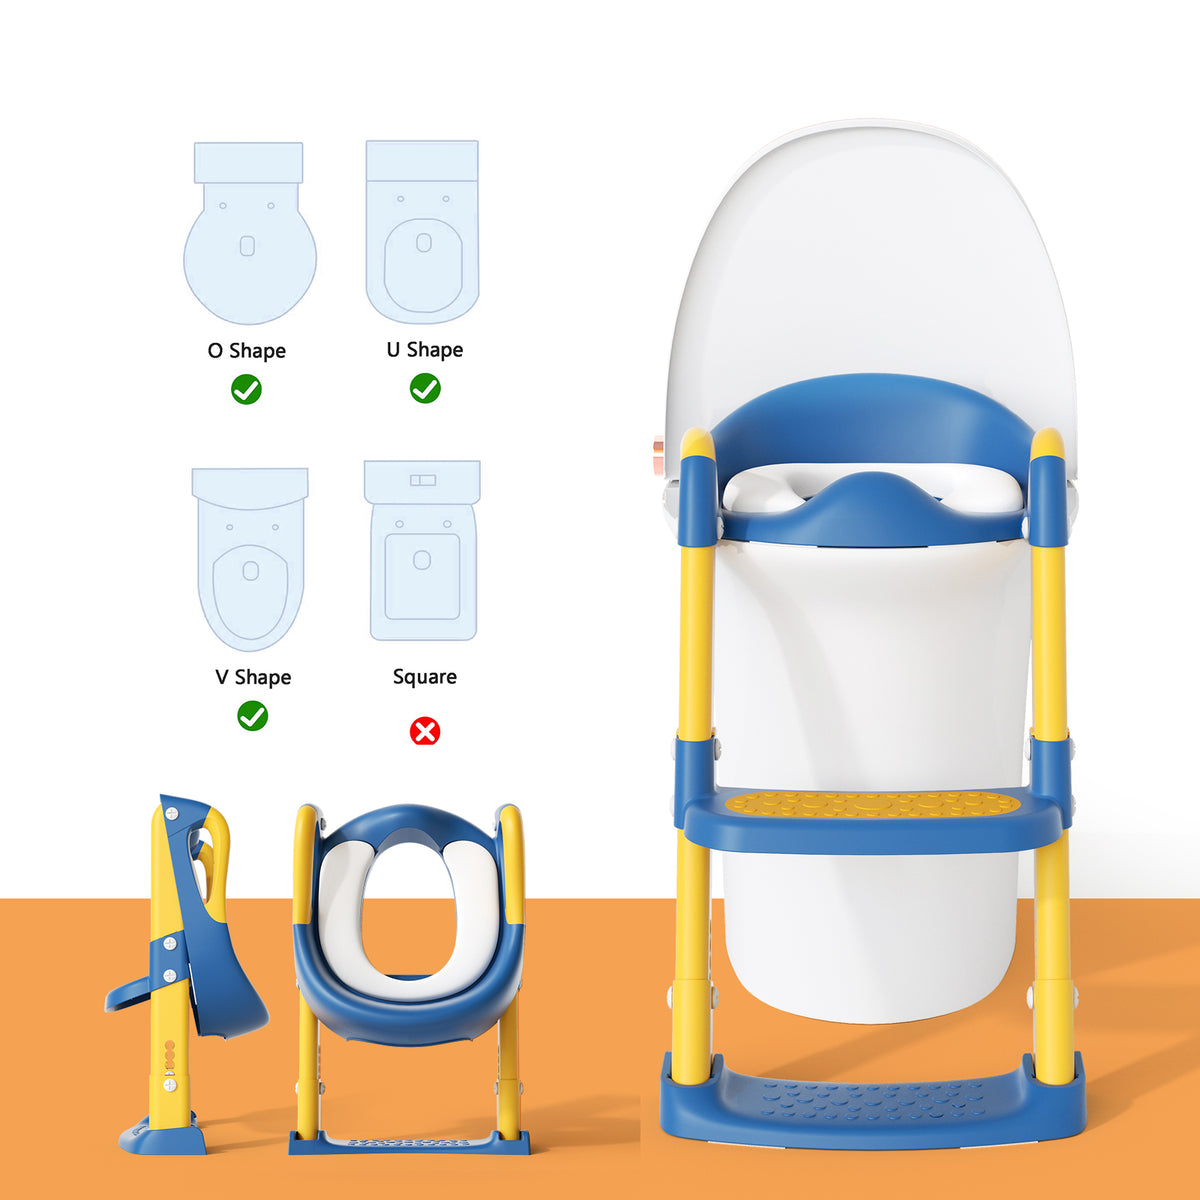 GLAF Toddler Potty Training Seat for Toilet with Ladder in blue yellow In Stock USA